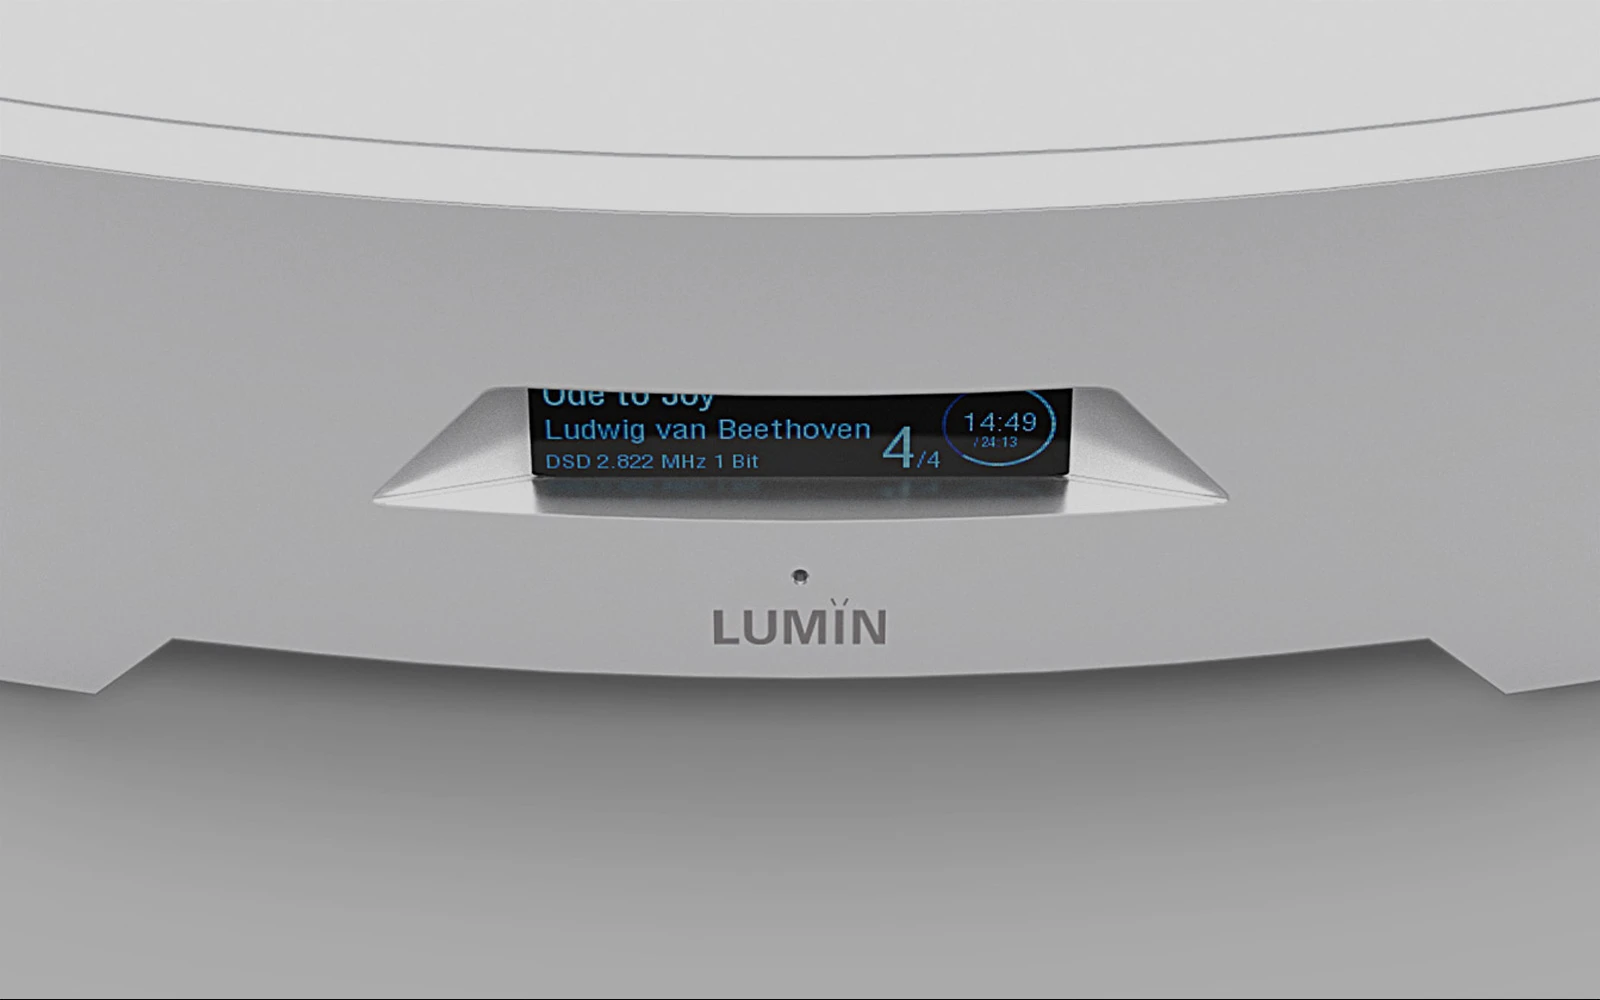 LUMIN P1 is available now